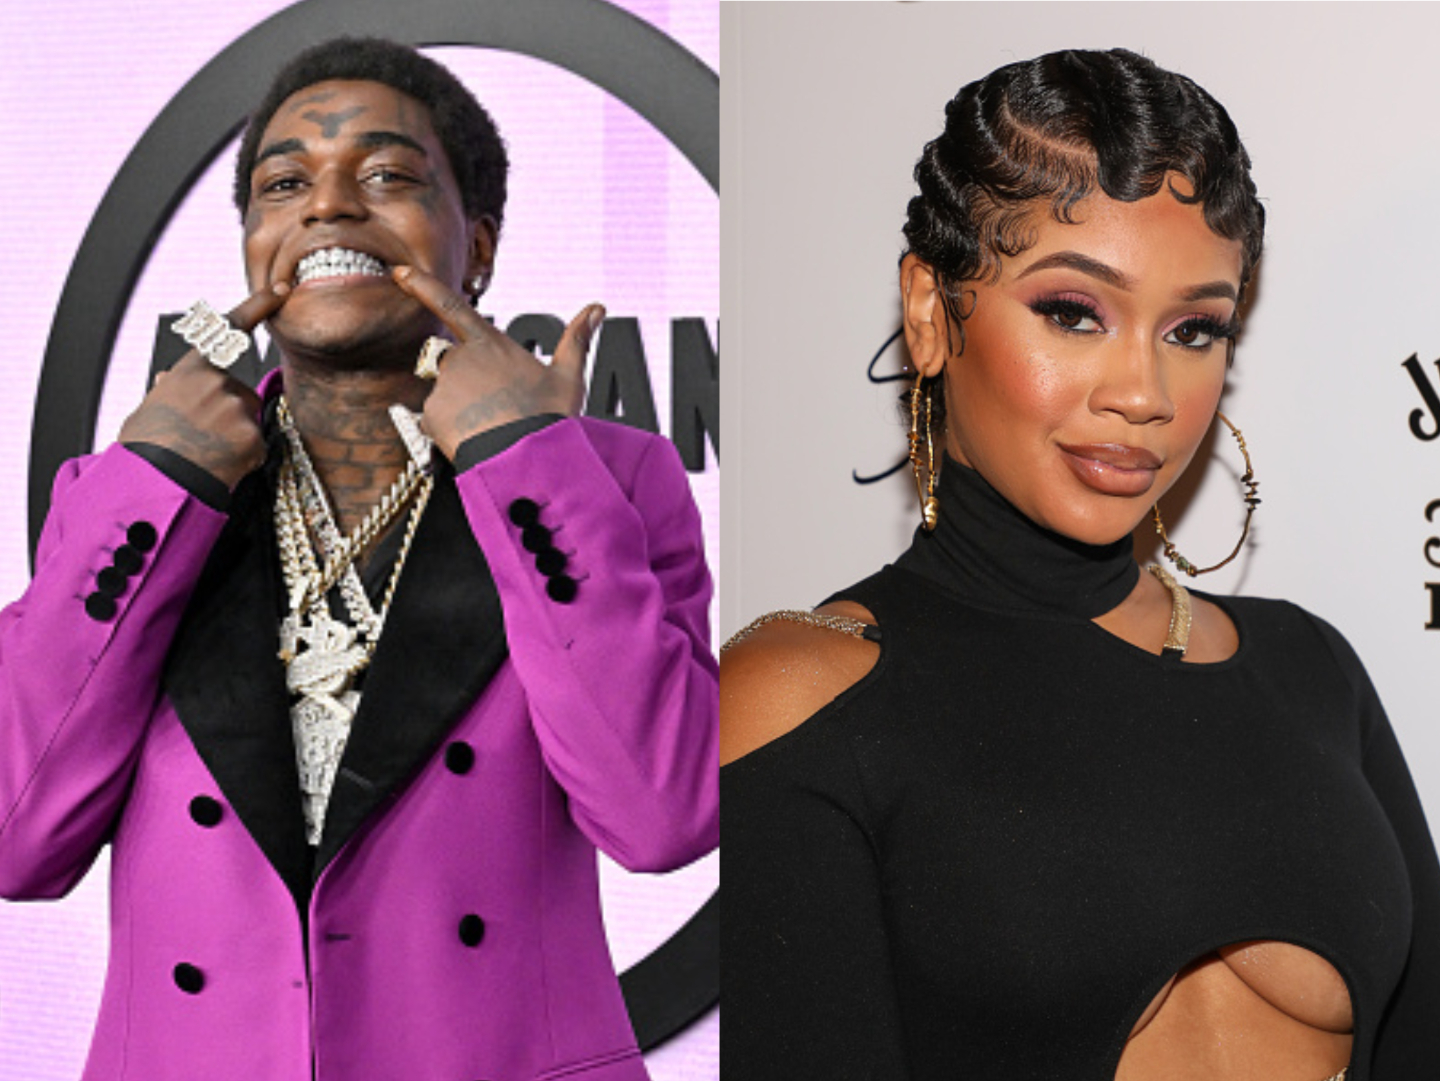 Kodak Black Tried To Get With Saweetie And It Didn't End Well